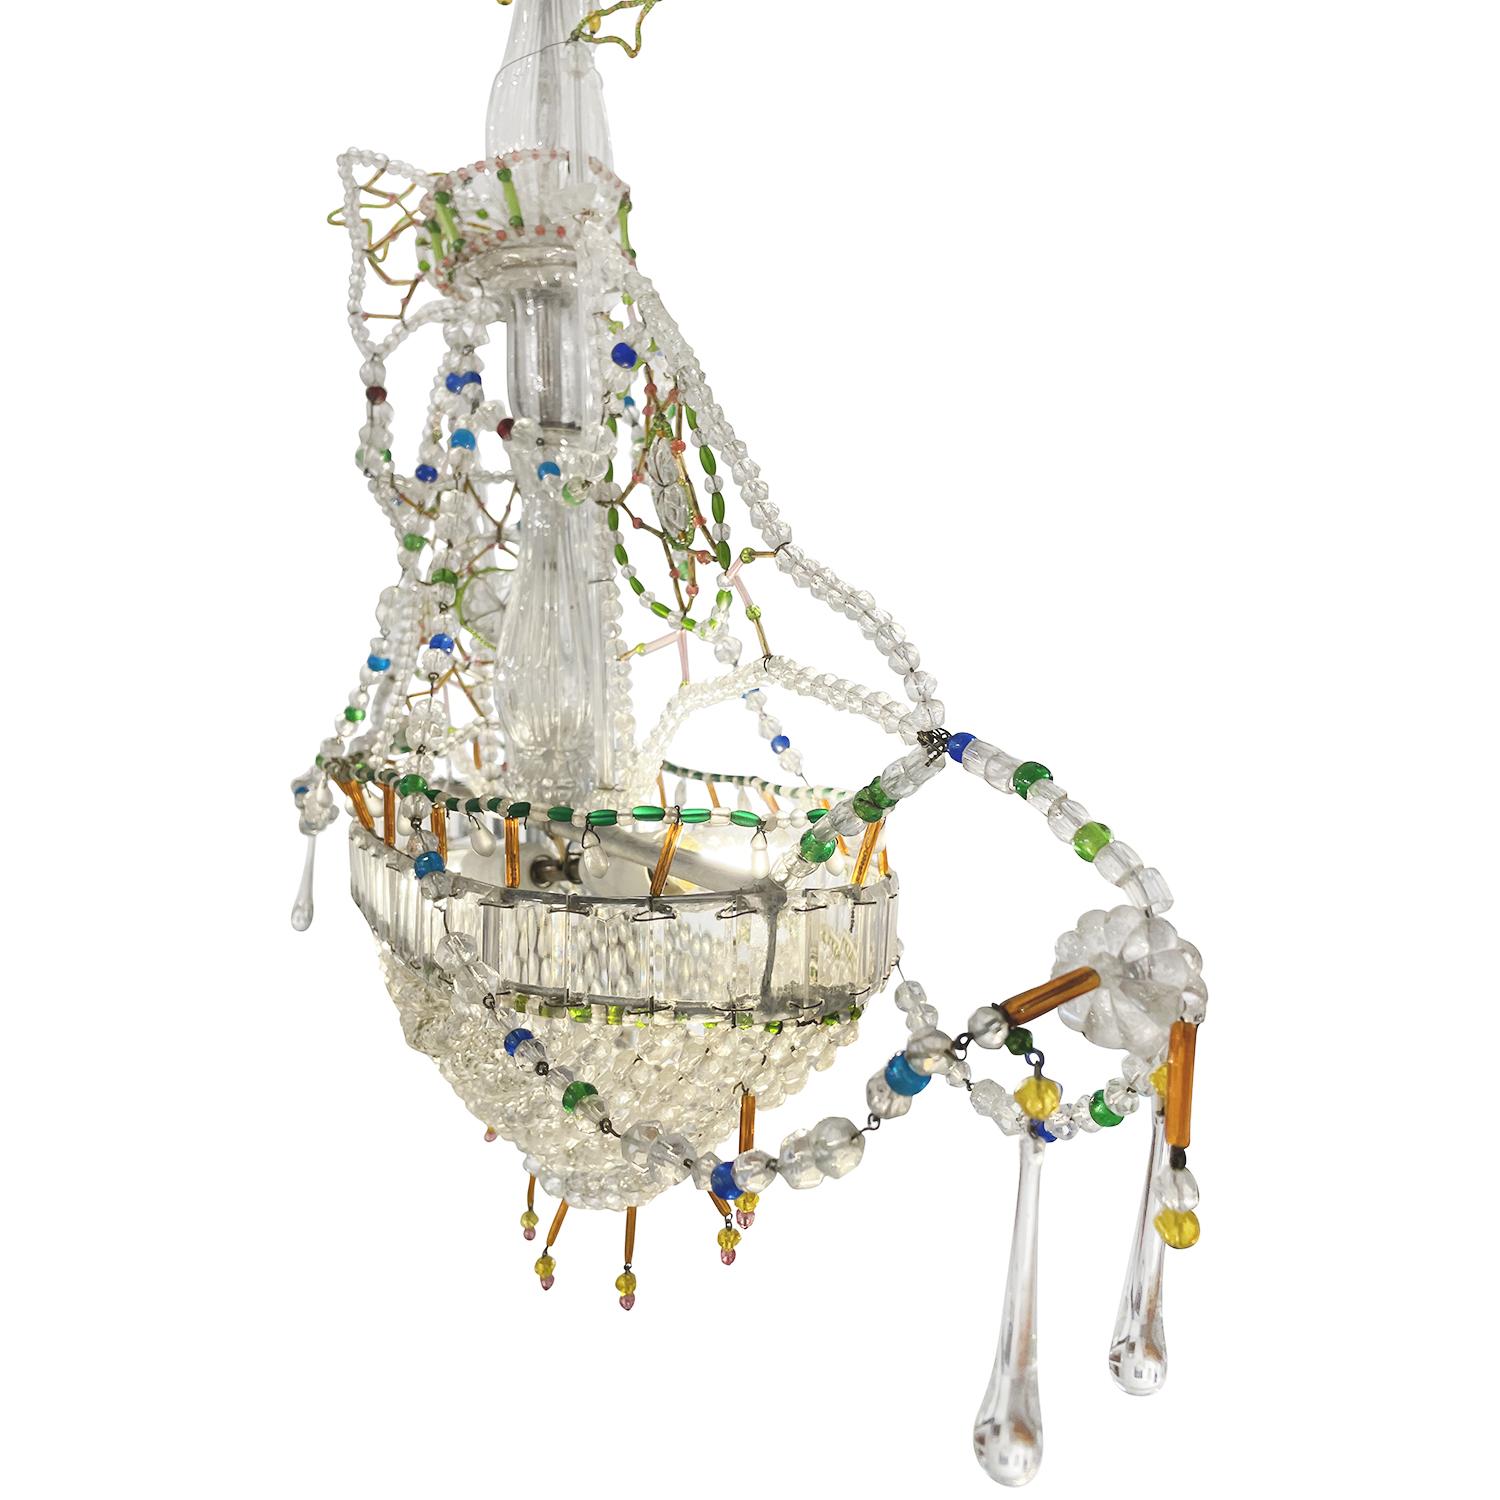 A colorful, vintage French Art Deco sail ship boat pendant made of hand blown cut crystal glass, in good condition. The detailed Parisian ceiling lamp is supported by a chrome beam, particularized by hanging prism glass pieces. The small chandelier